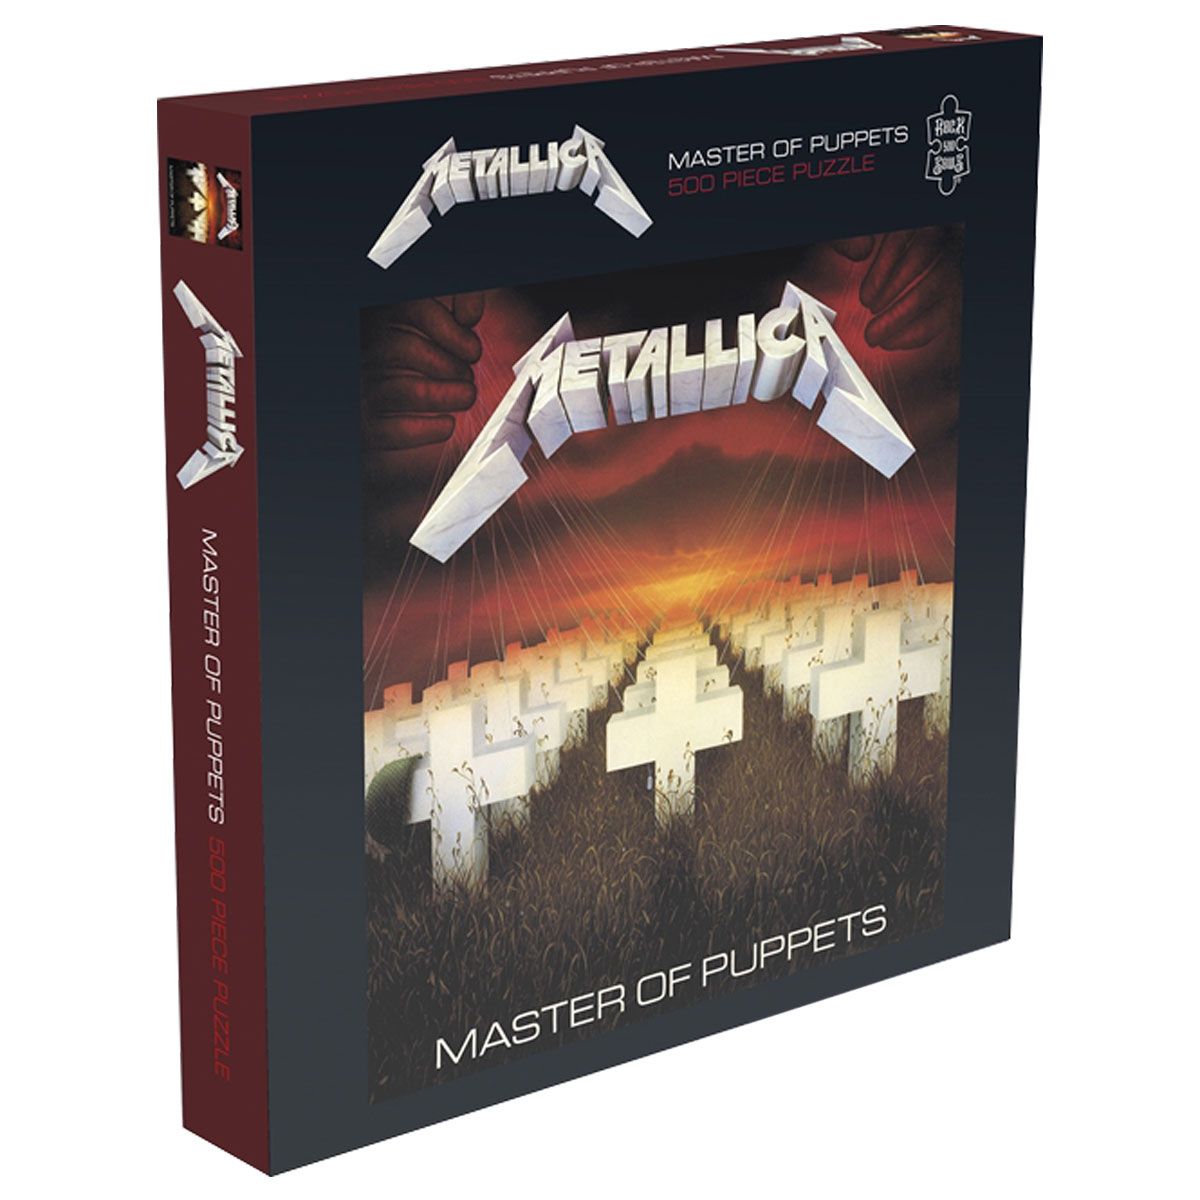 Metallica 'Master Of Puppets' 500 Piece Jigsaw Puzzle NEW 